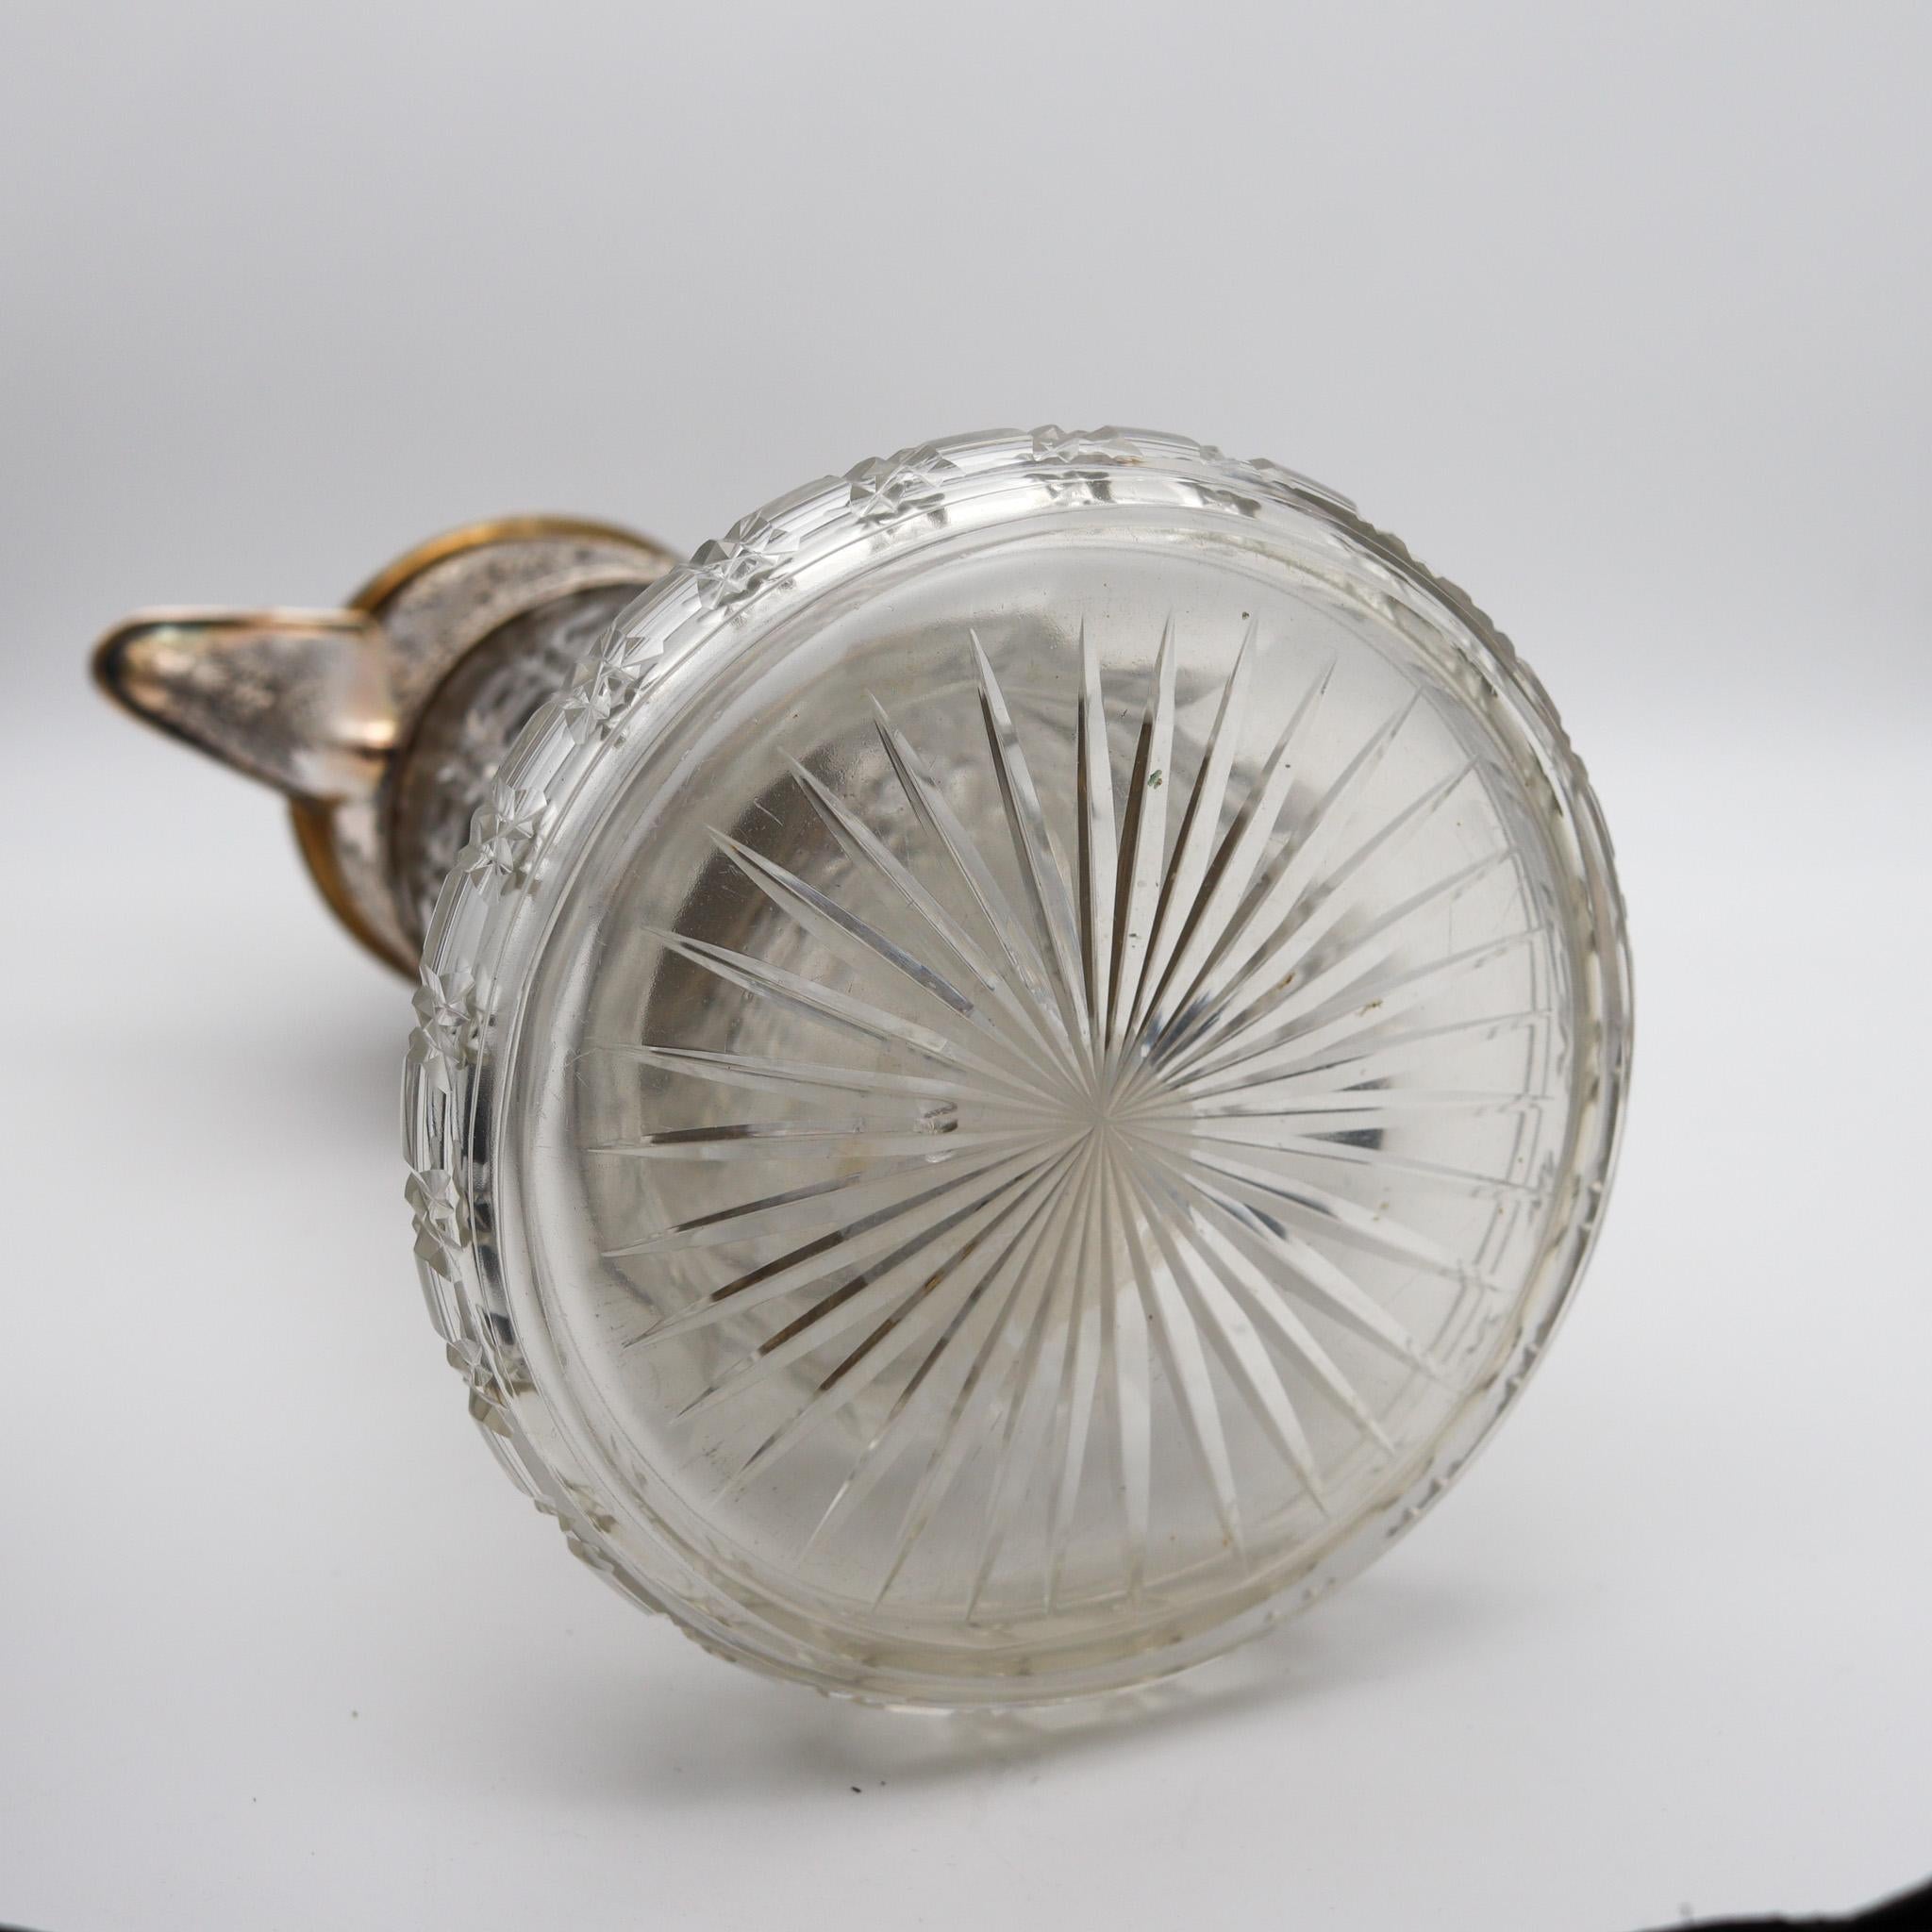 Charles Boyton 1899 London Wine Ewer Pitcher In Cut Crystal And .925 Sterling For Sale 4